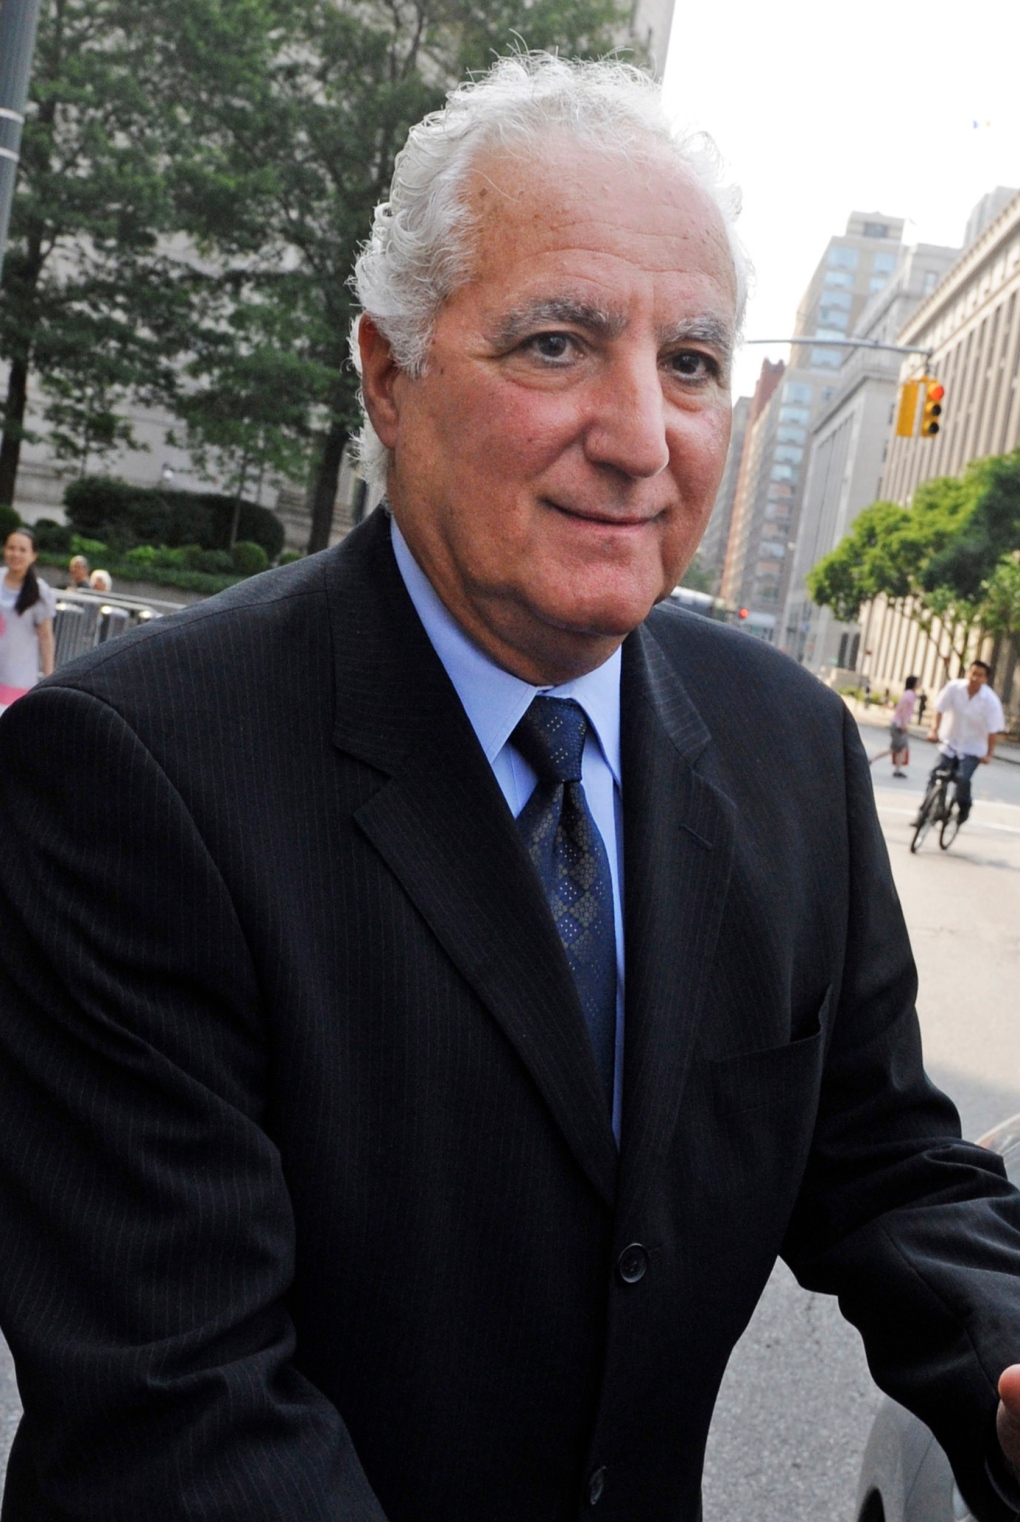 Daniel Bonventre, among5 convicted in Madoff fraud